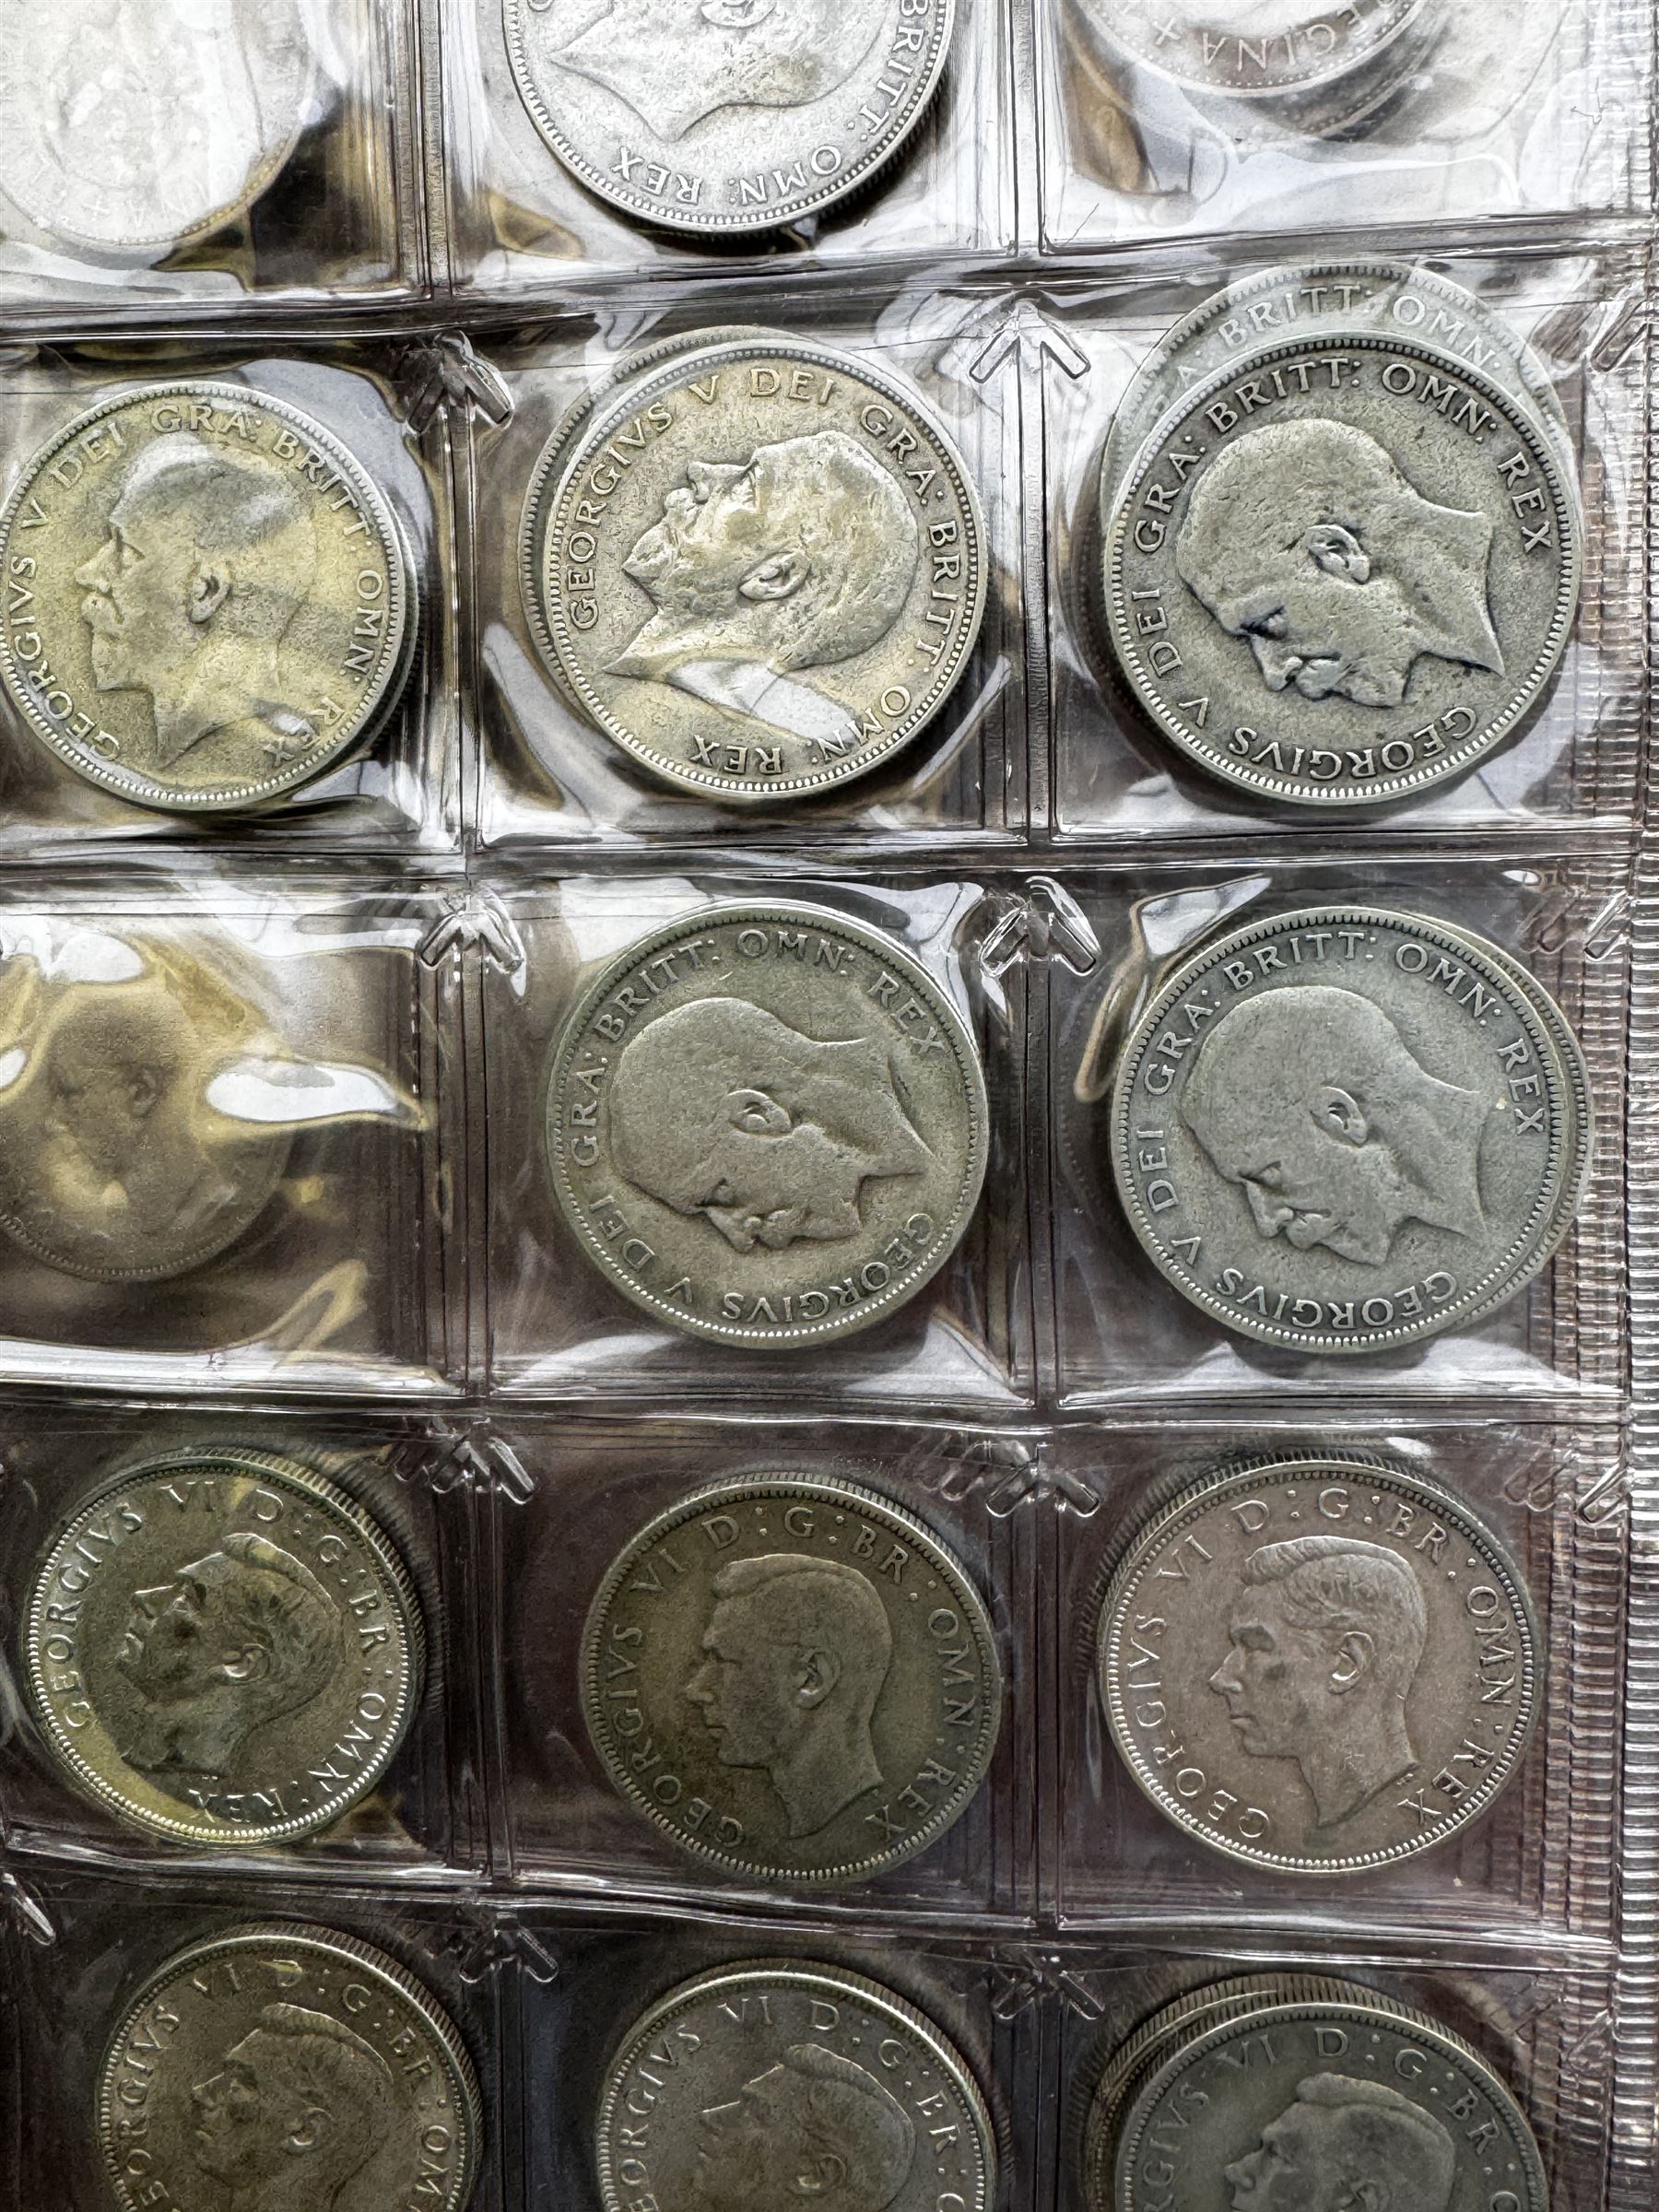 Mostly Great British coins - Image 4 of 7